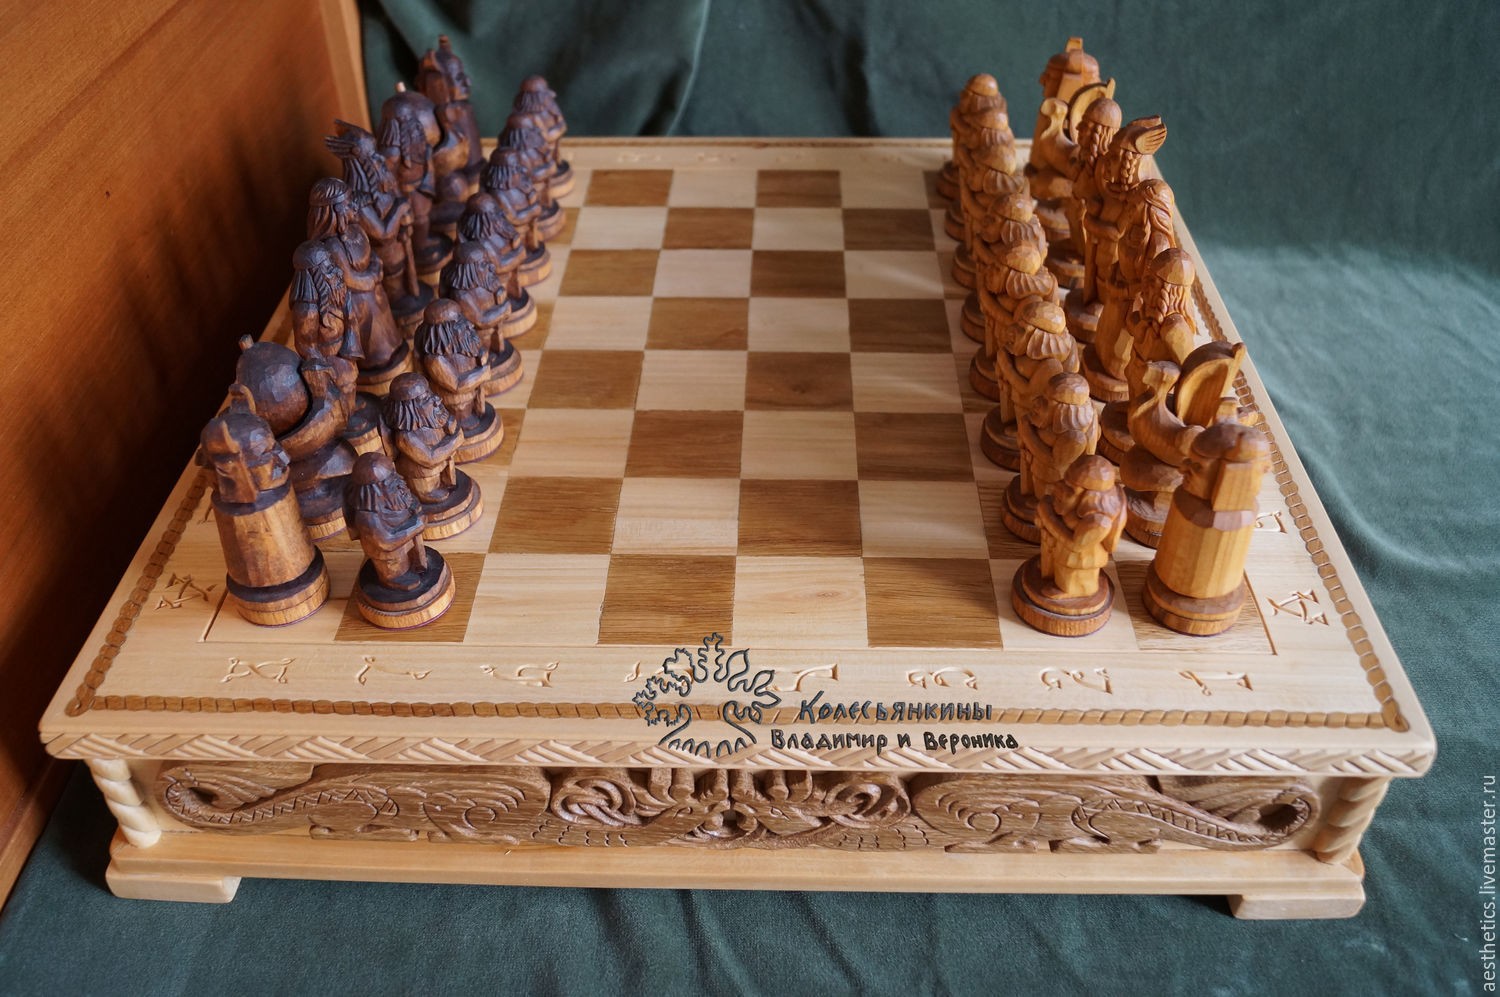 Chess Papercraft Free Template Download